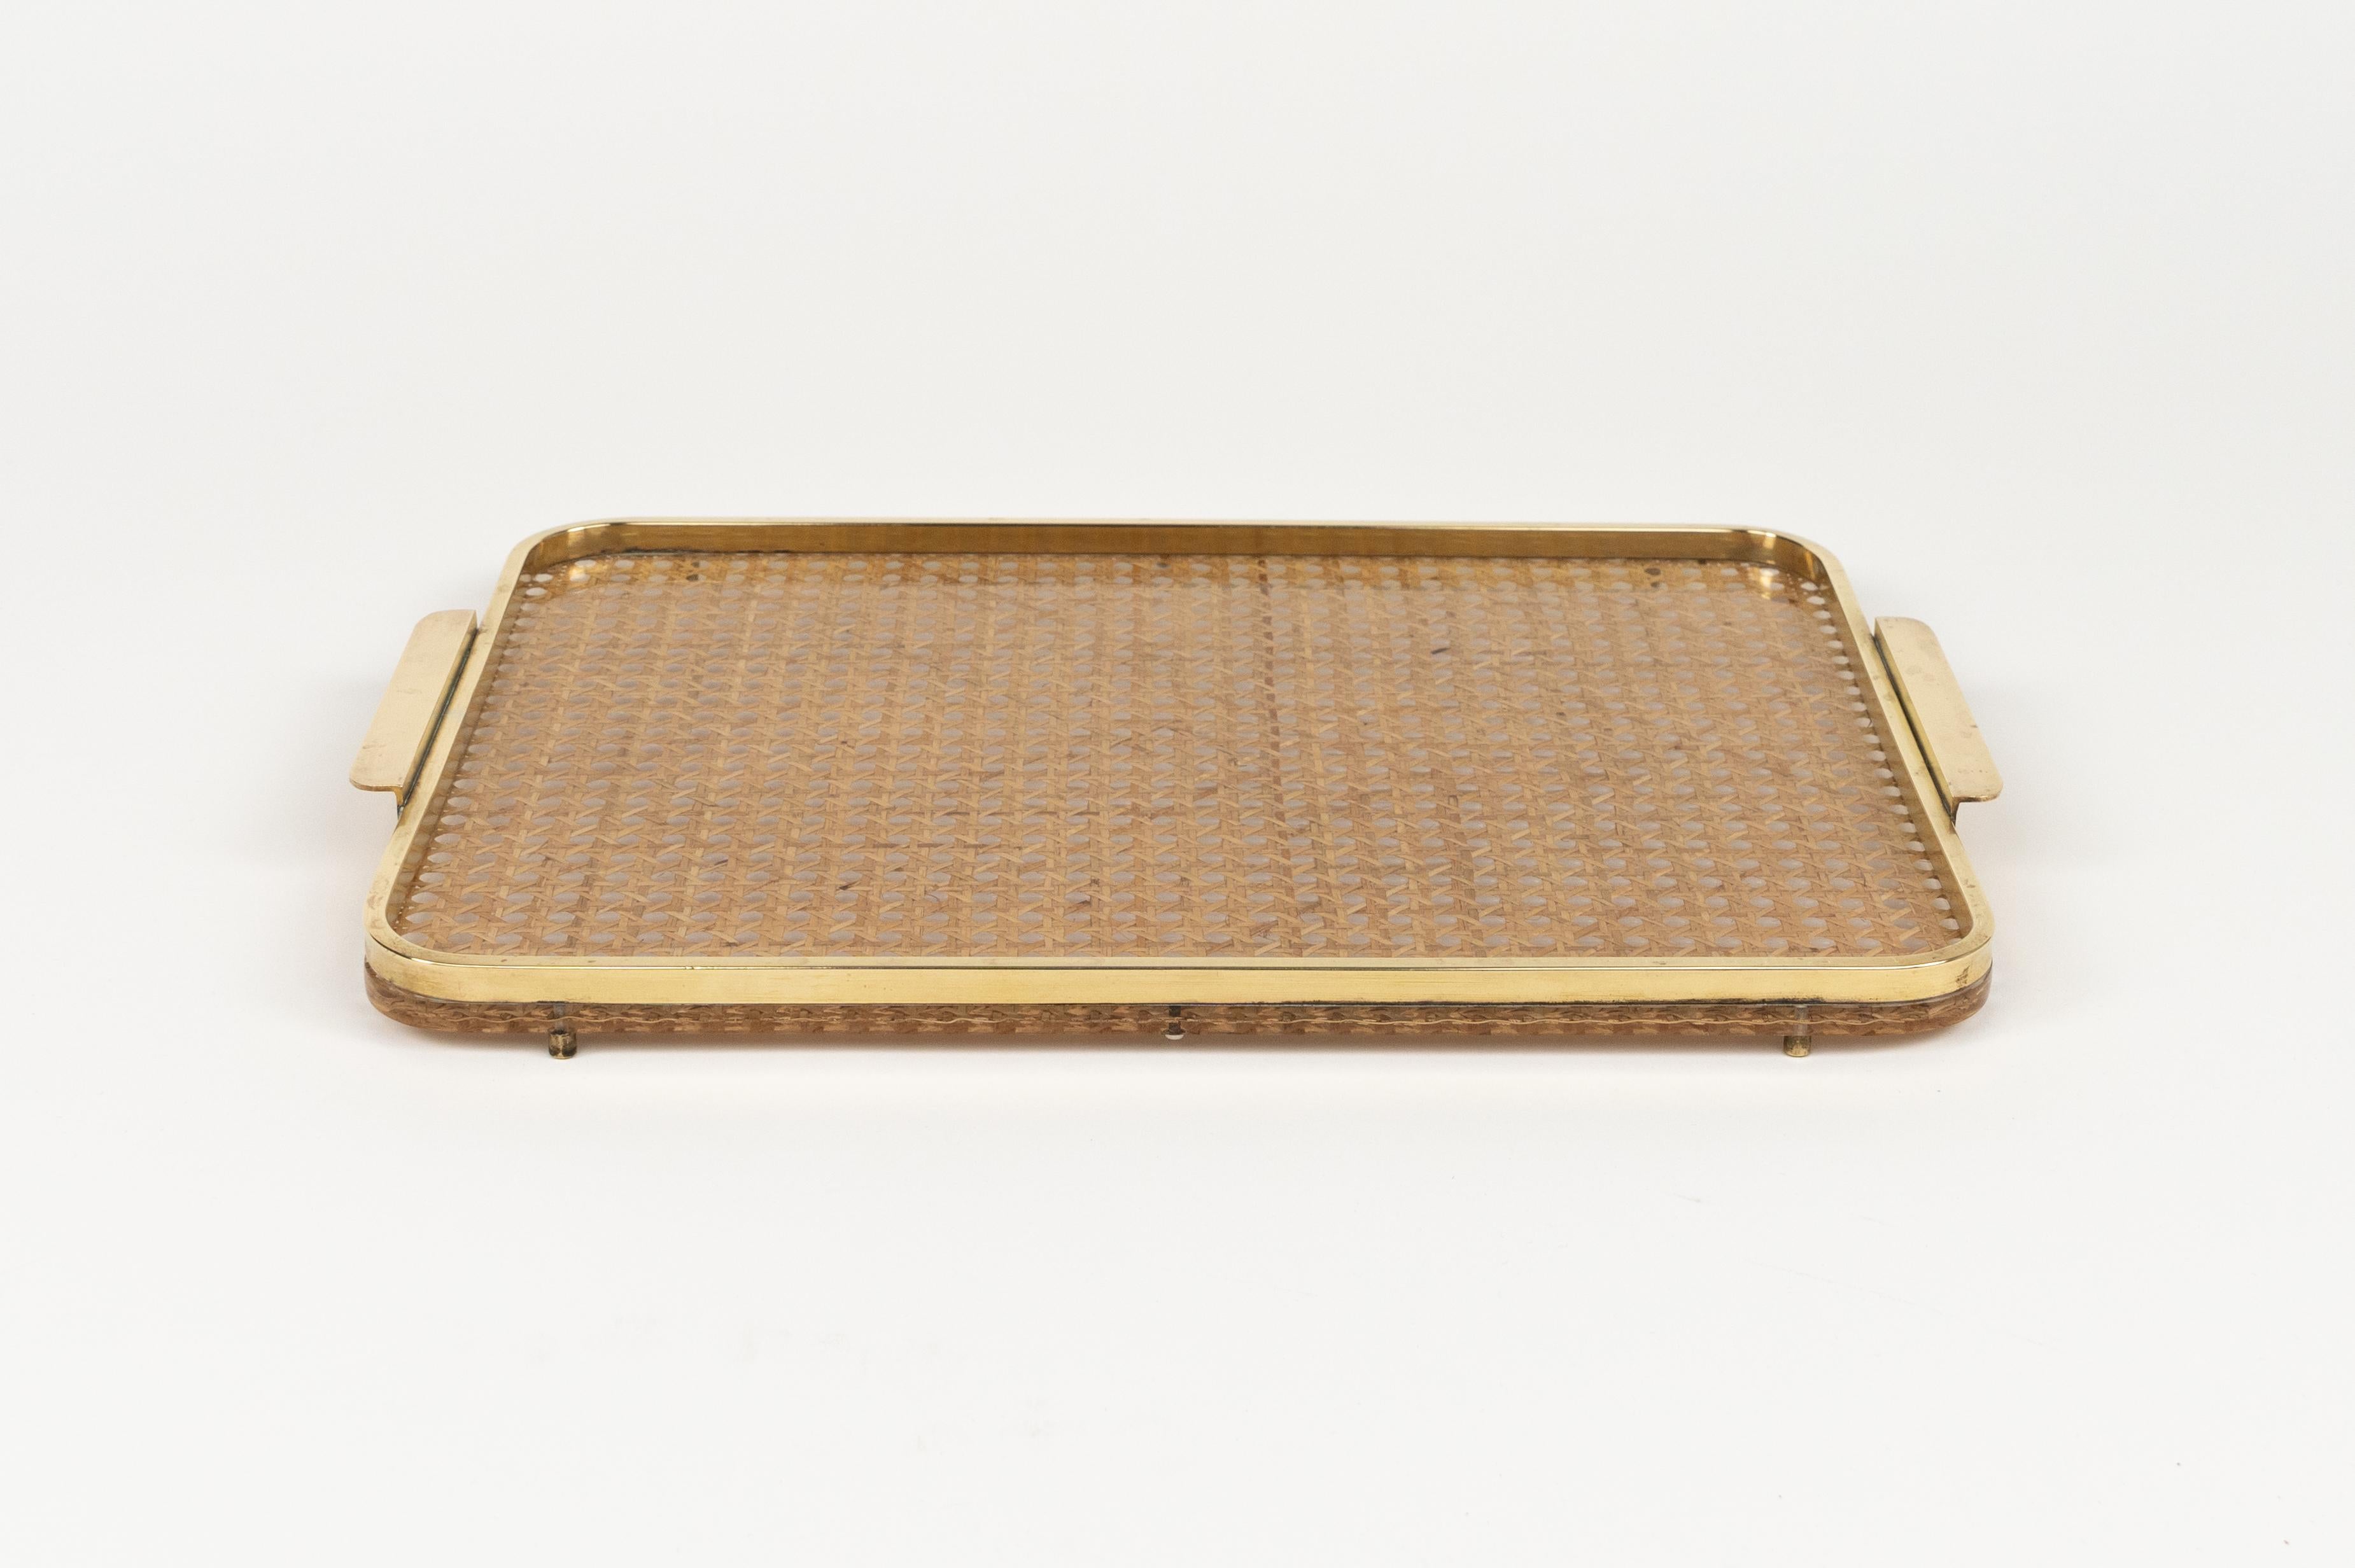 Midcentury beautiful rectangular with handles, serving tray in lucite and rattan with brass border in the style of Christian Dior.

Made in Italy in the 1970s.  

Great accessory for any modern interior.